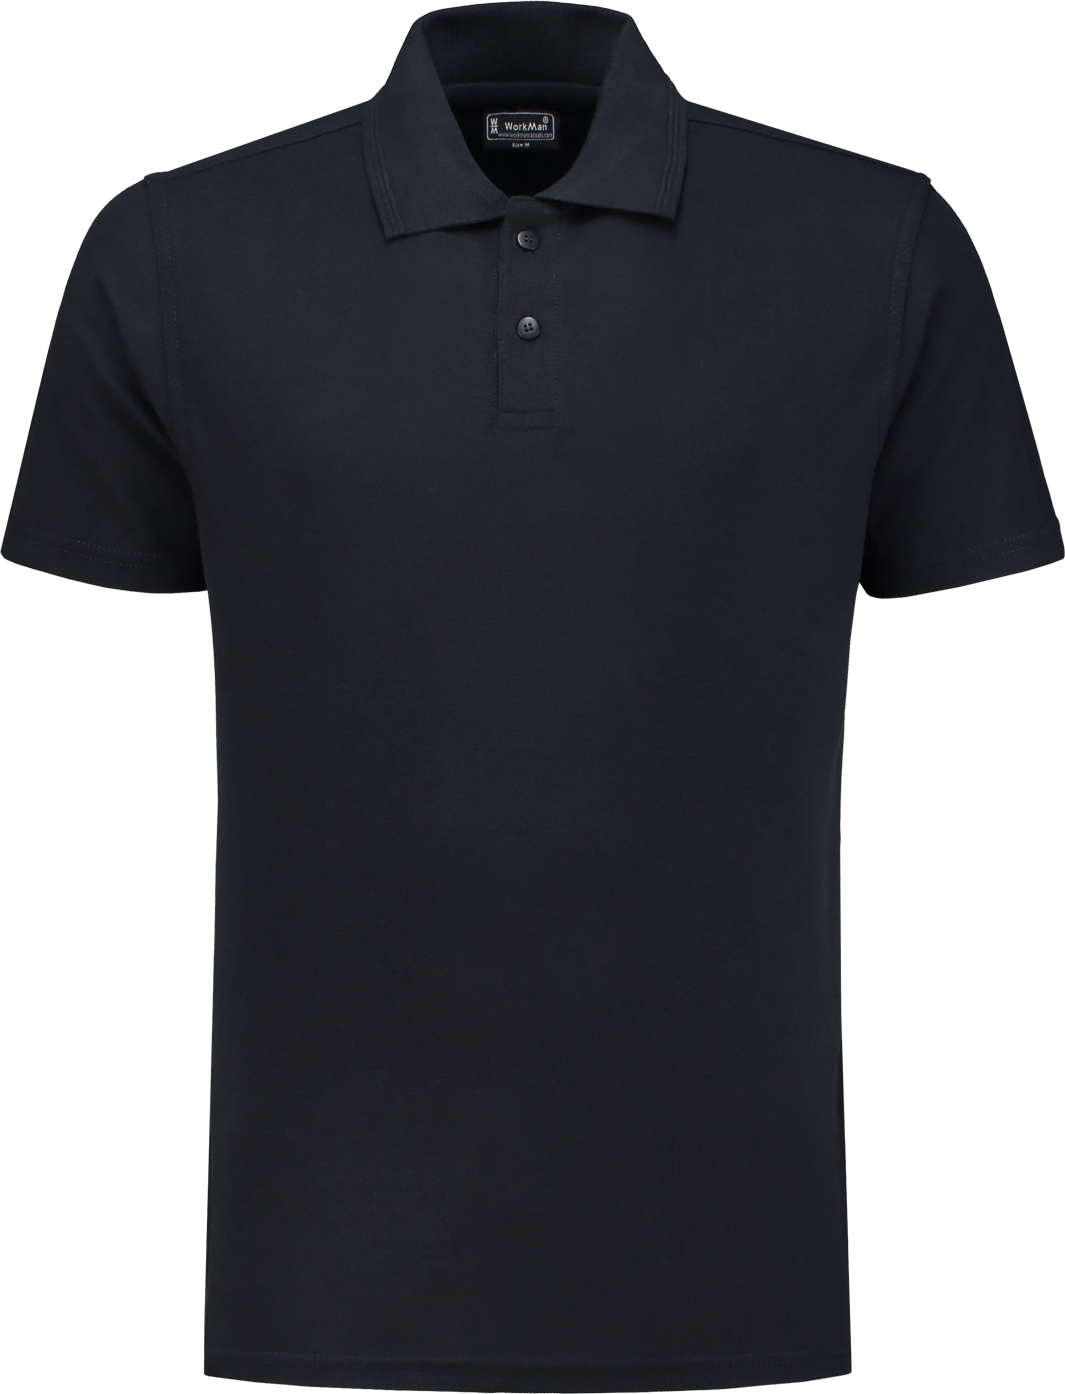 10.6.8102.05 8102 Poloshirt Outfitters Navy 2XL